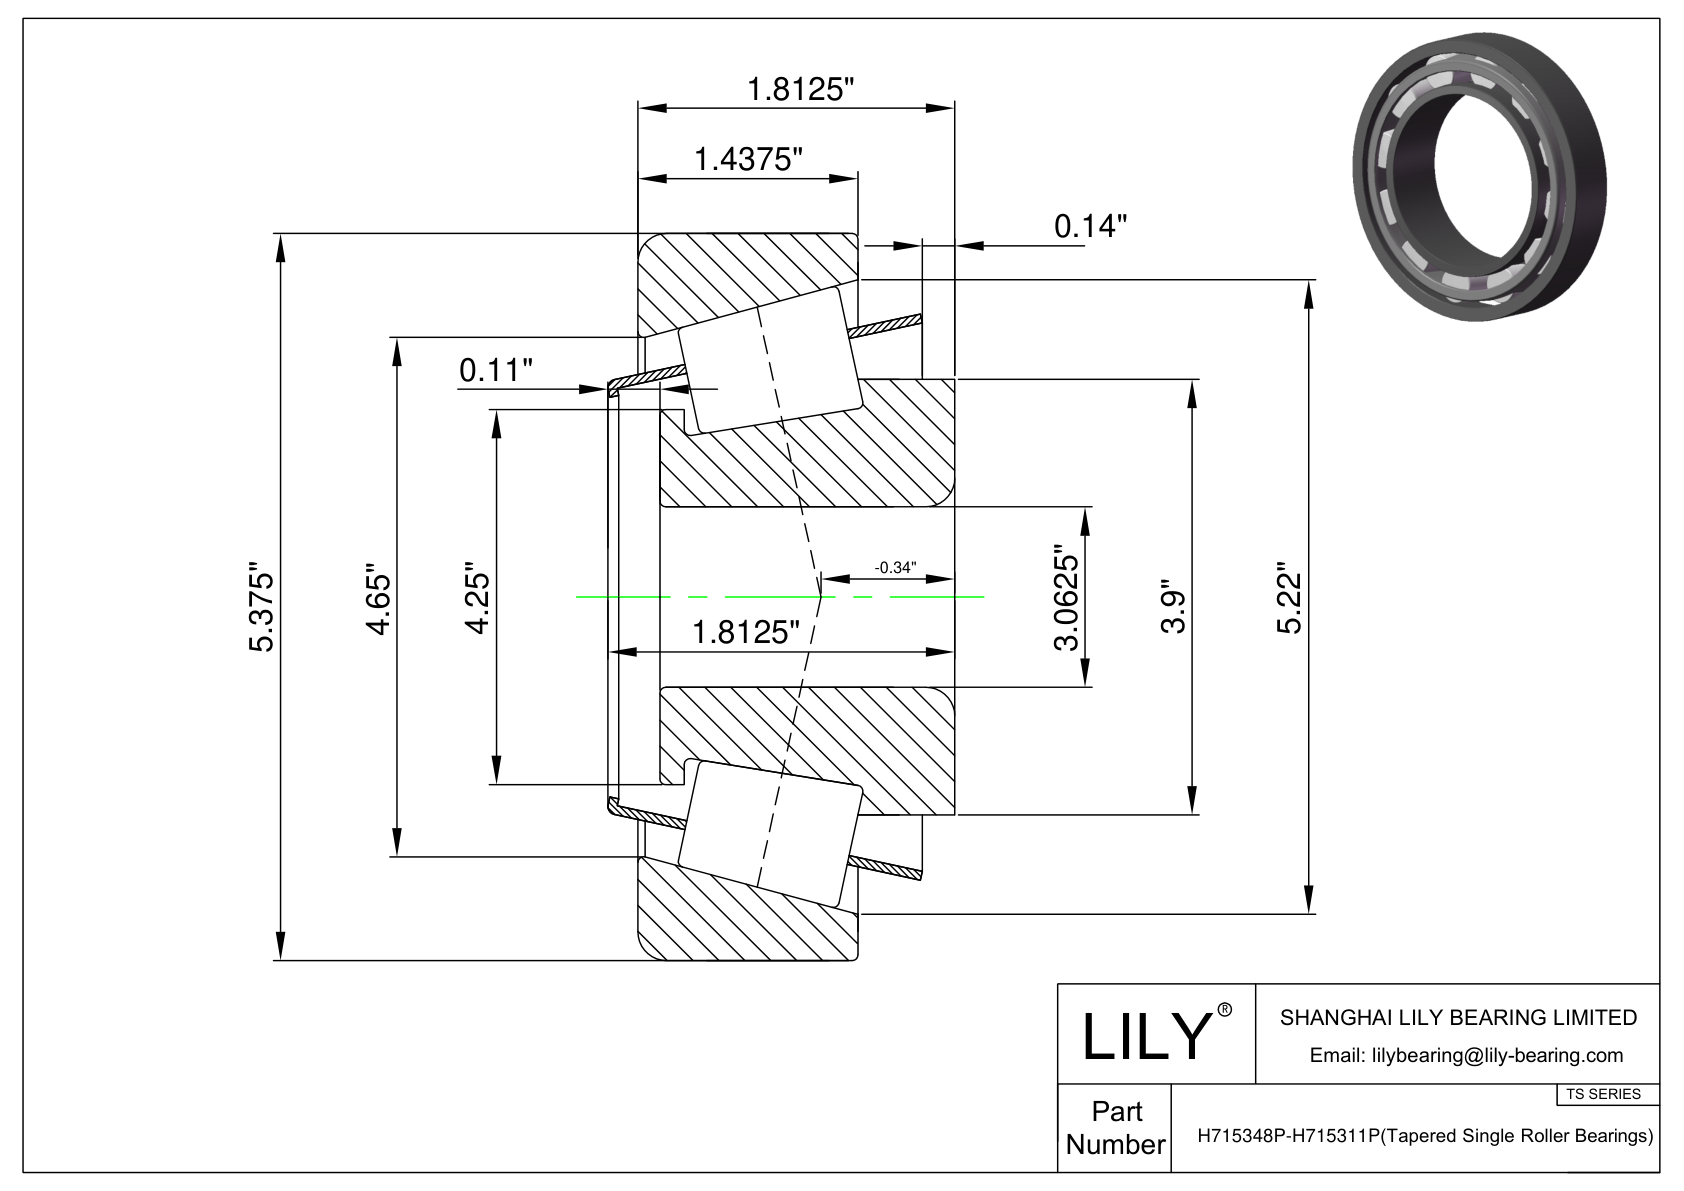 H715348P-H715311P TS (Tapered Single Roller Bearings) (Imperial) cad drawing